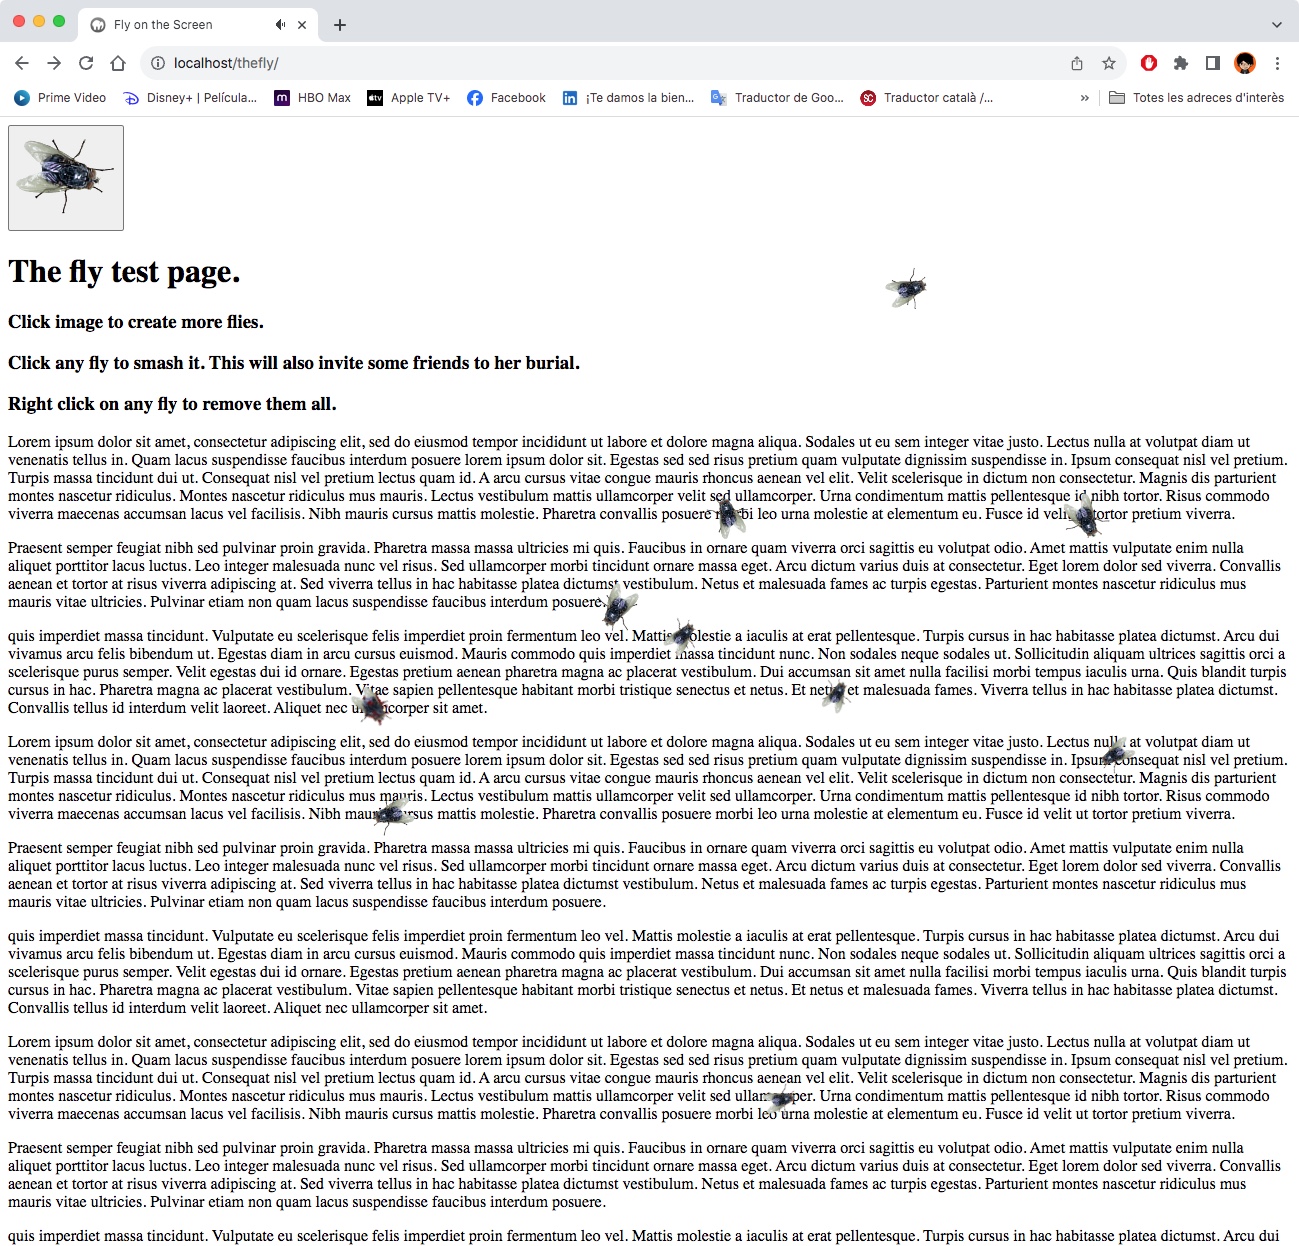 A Fly animates even the most boring page.